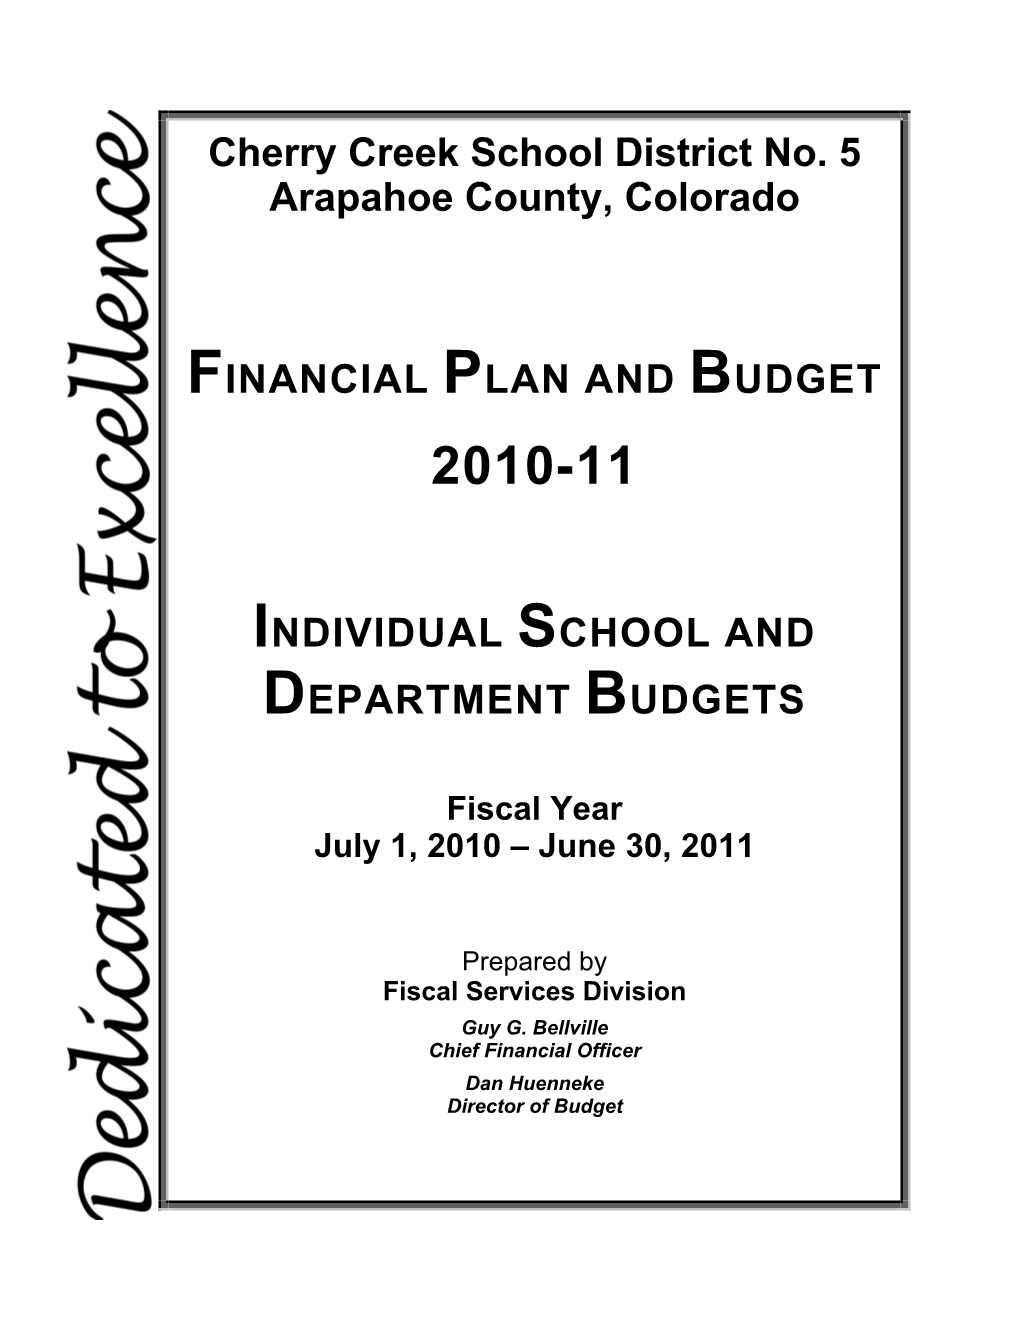 Financial Plan and Budget 2010-11